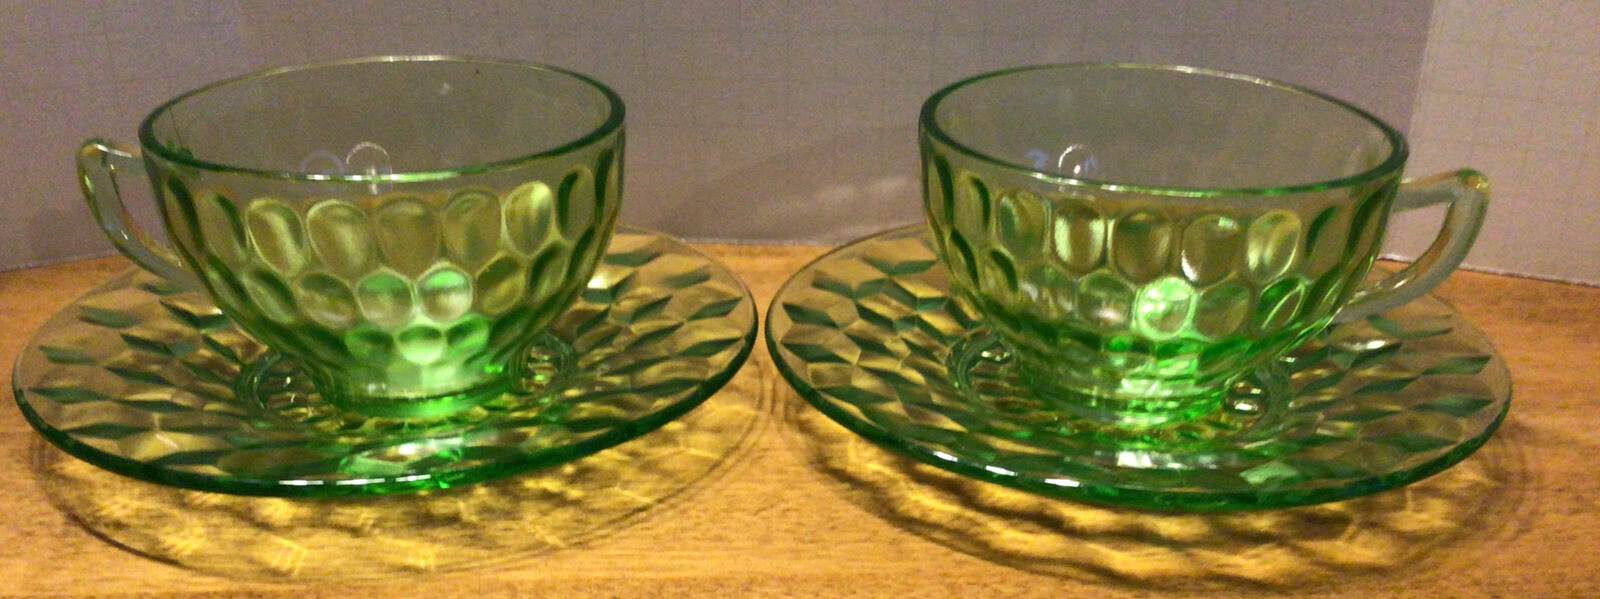 2 Antique Depression Glass Tea Cups And Saucers, Uv Reactive, Perfect